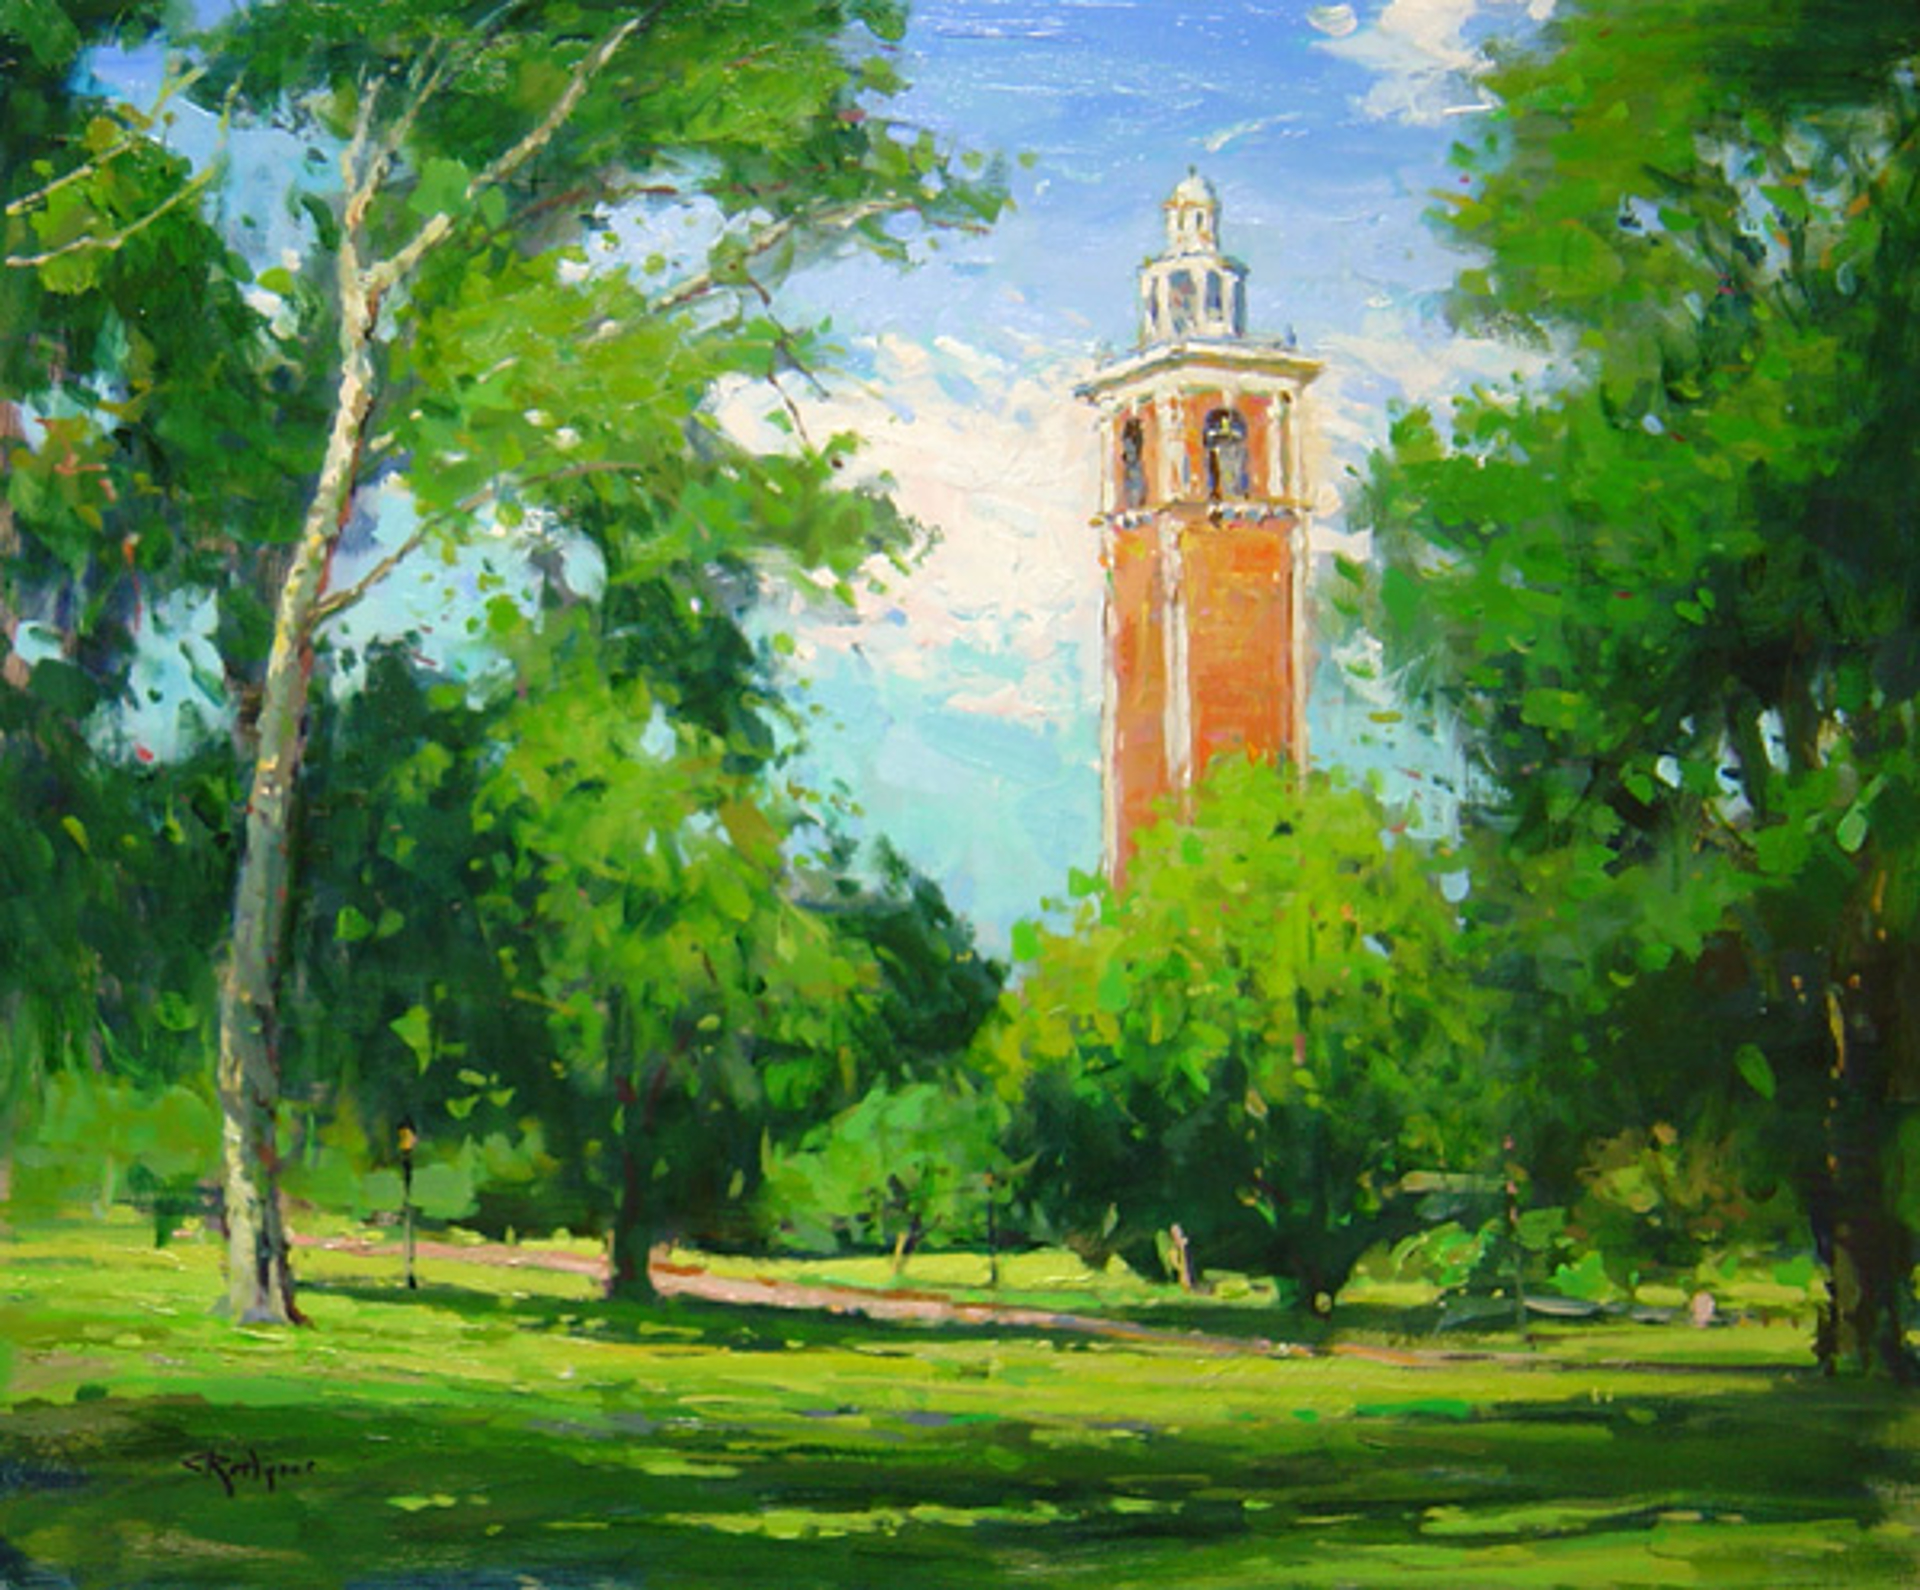 The Carillon Tower in Summer by Jim Rodgers